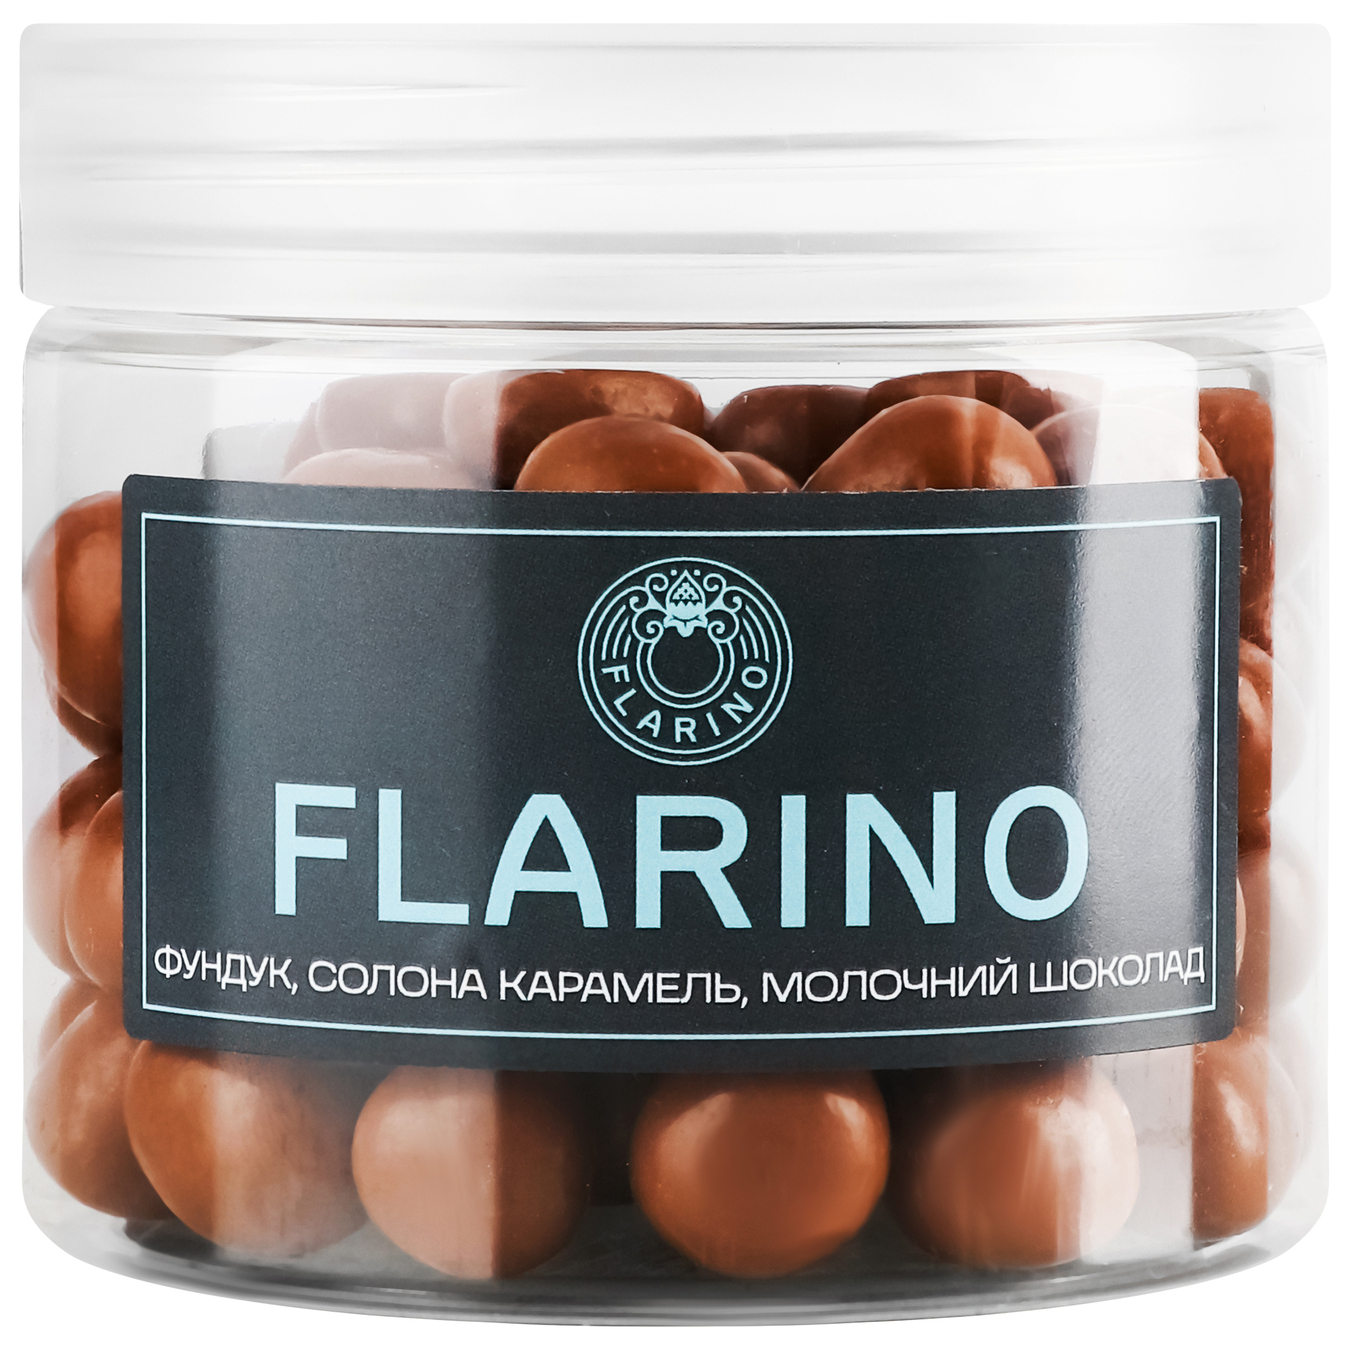 Flarino hazelnuts in salted caramel covered with milk chocolate 180g